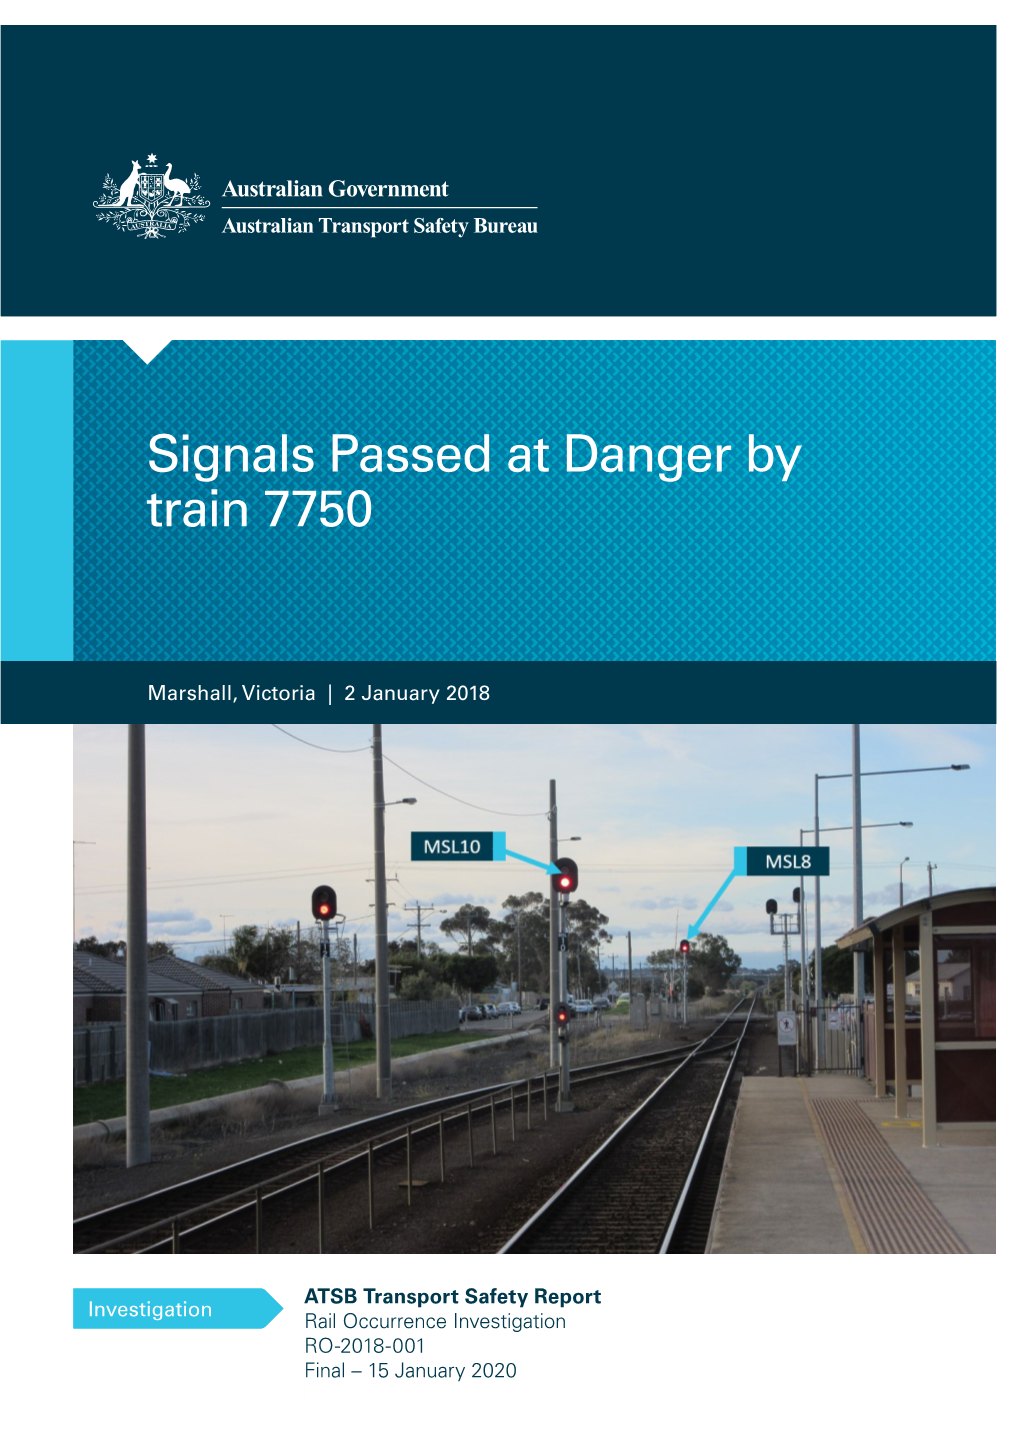 Signals Passed at Danger by Train 7750, Marshall, Victoria on 2 January 2018